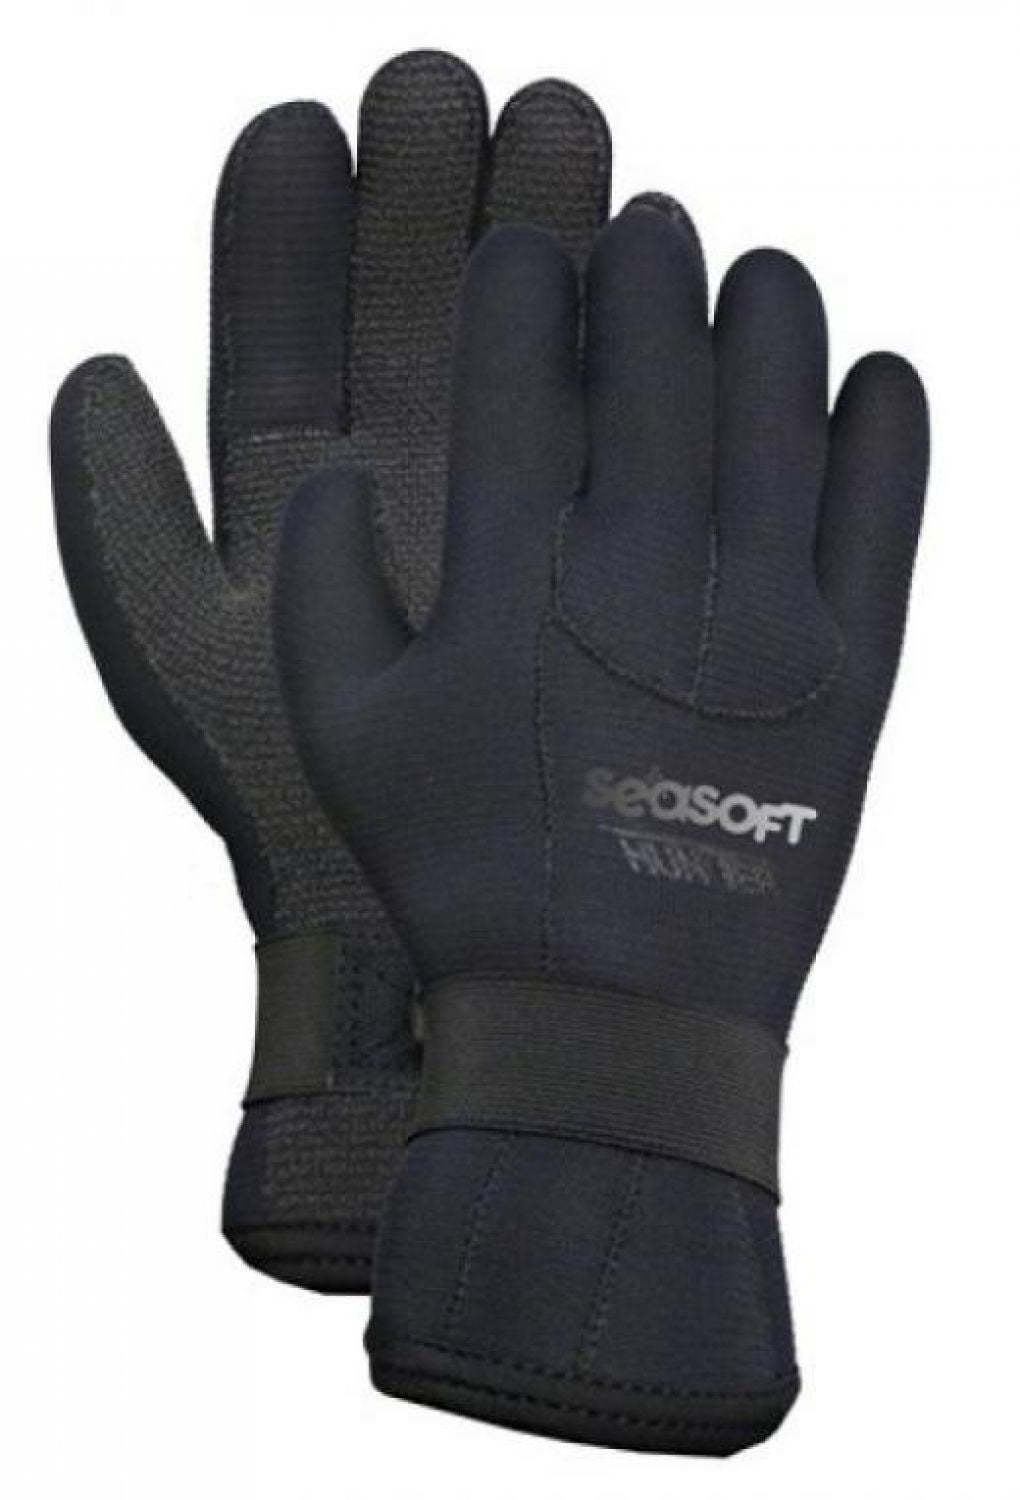 S,M,L,XL,XXL 1.5m Diving Watersports Gloves TOP QUALITY Waterproof of Sweden 